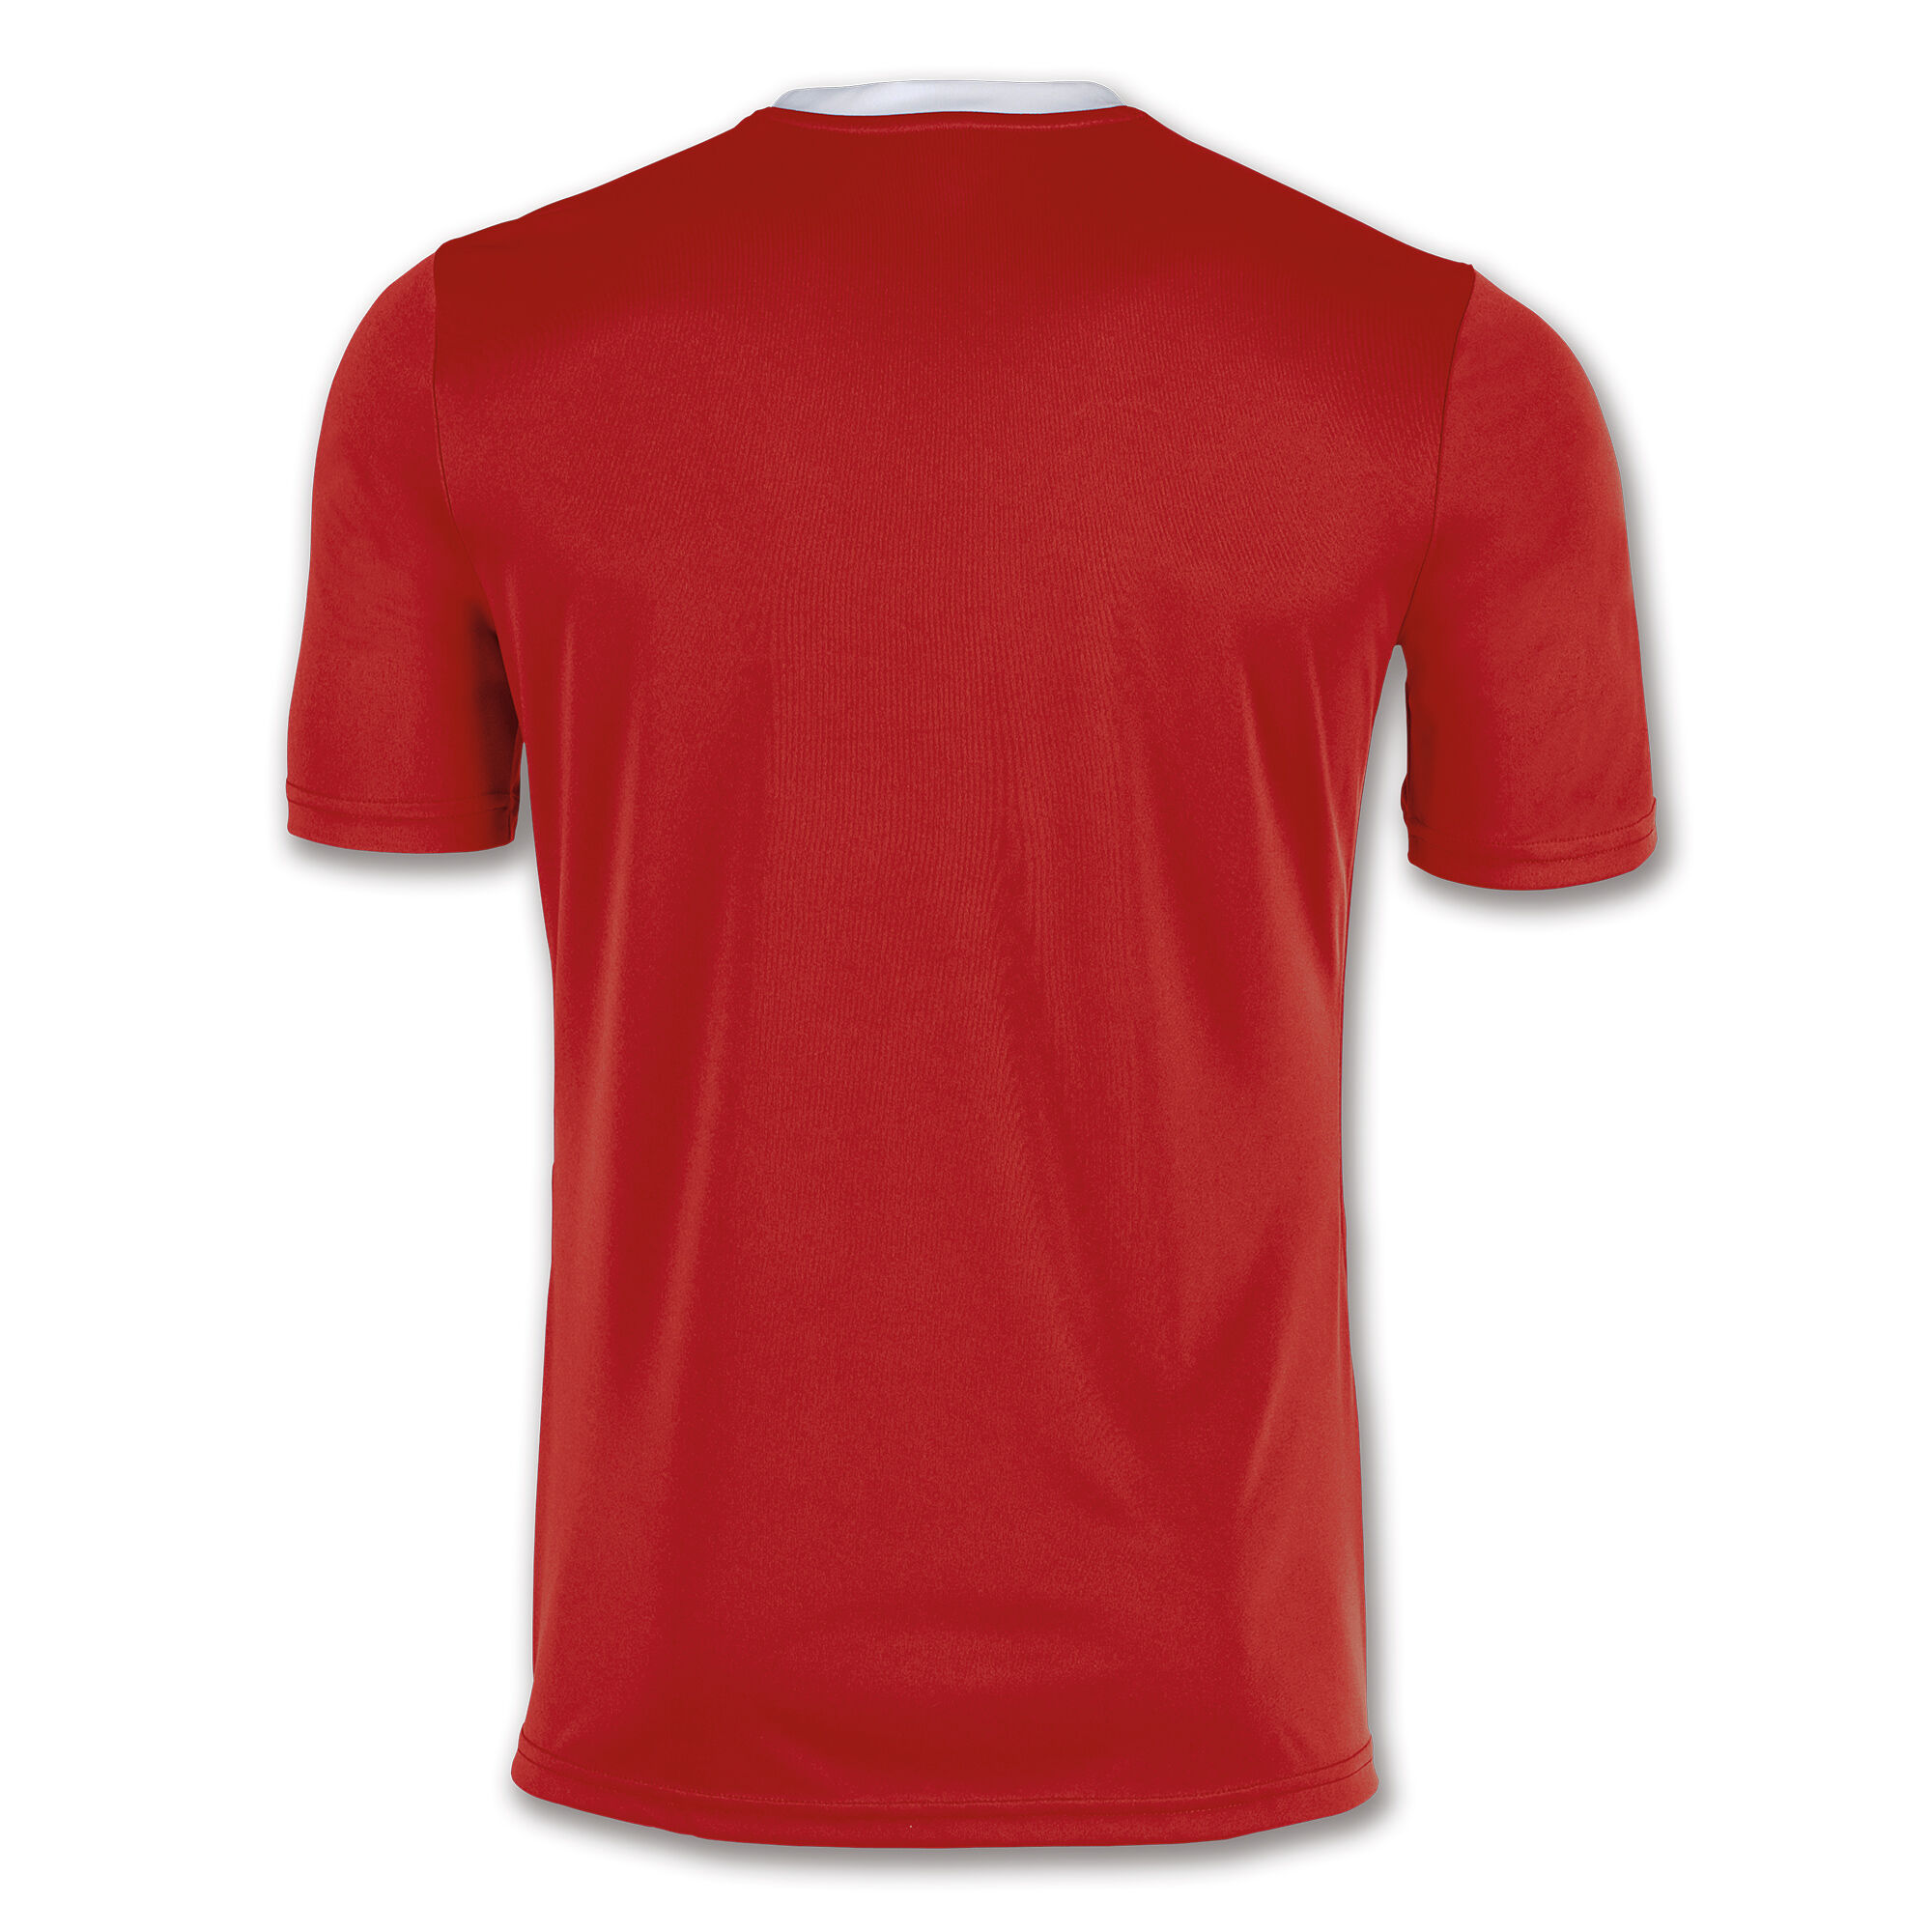 MAILLOT MANCHES COURTES HOMME WINNER ROUGE BLANC